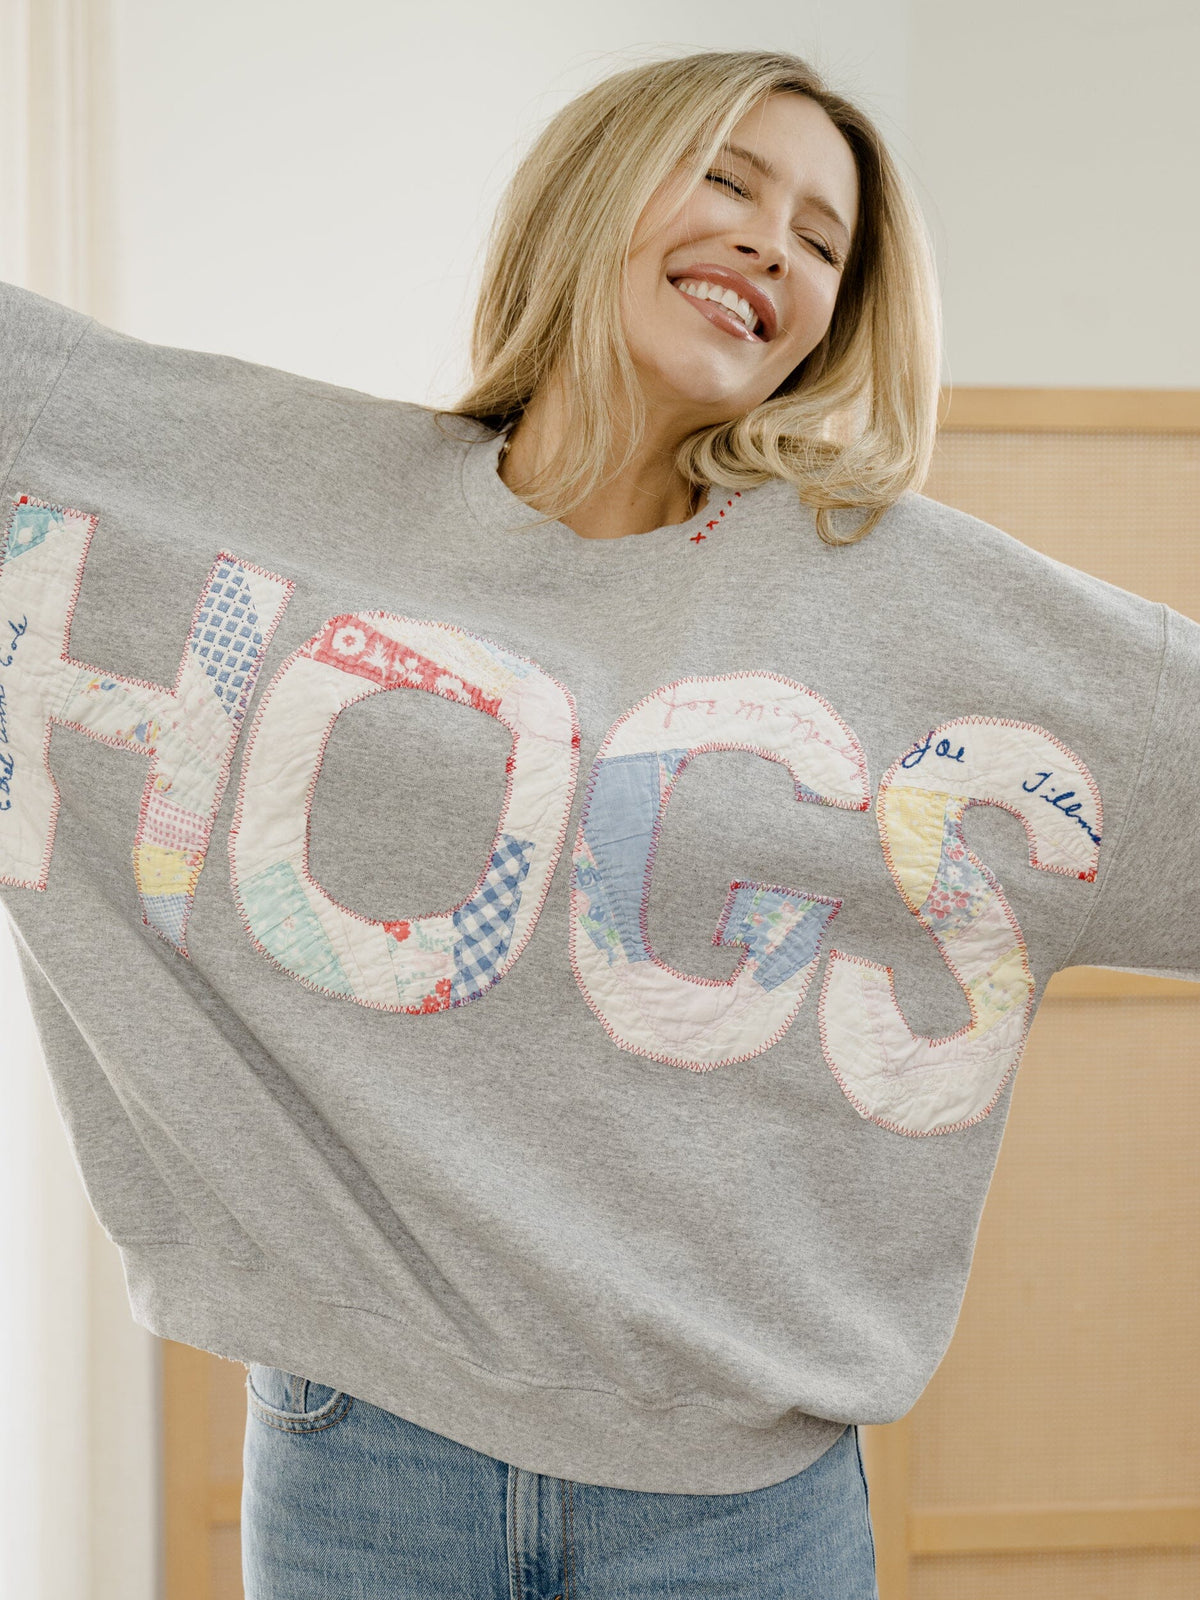 Hogs Quilted Applique Gray Thrifted Sweatshirt